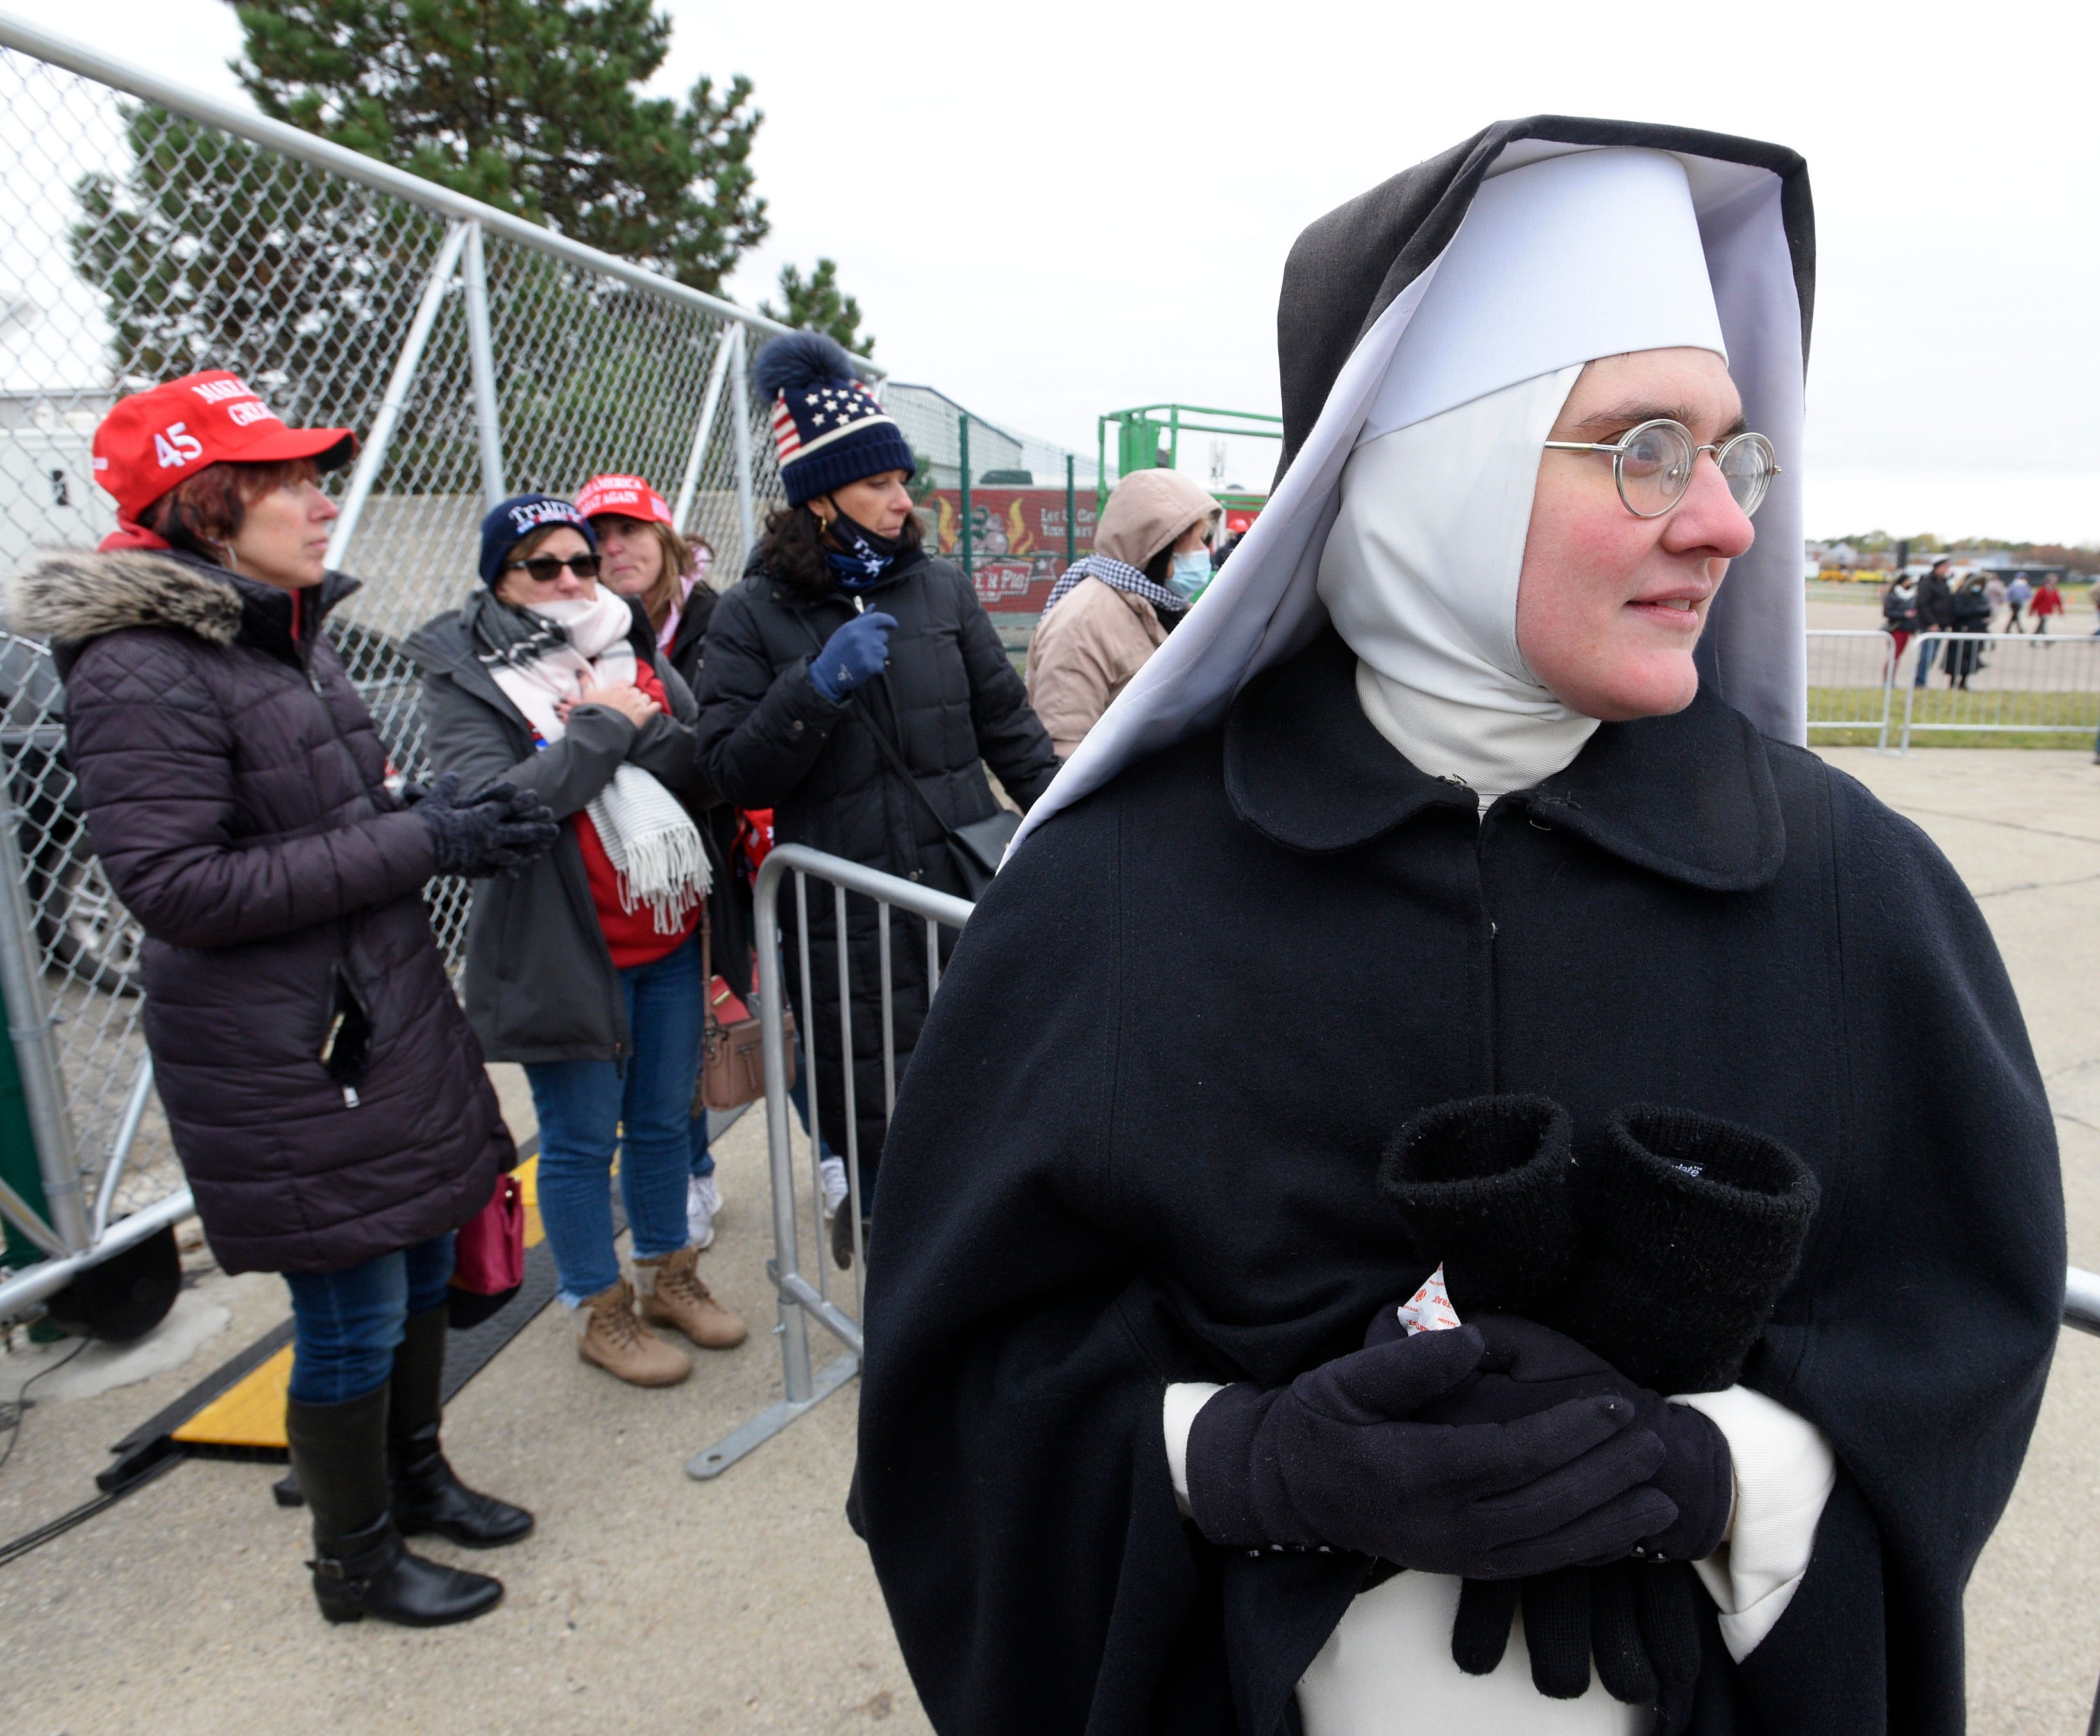 A Dominican nun waits for a friend as supporters of President Donald Trump wait for his arrival at the Oakland International Airport in Waterford Township.